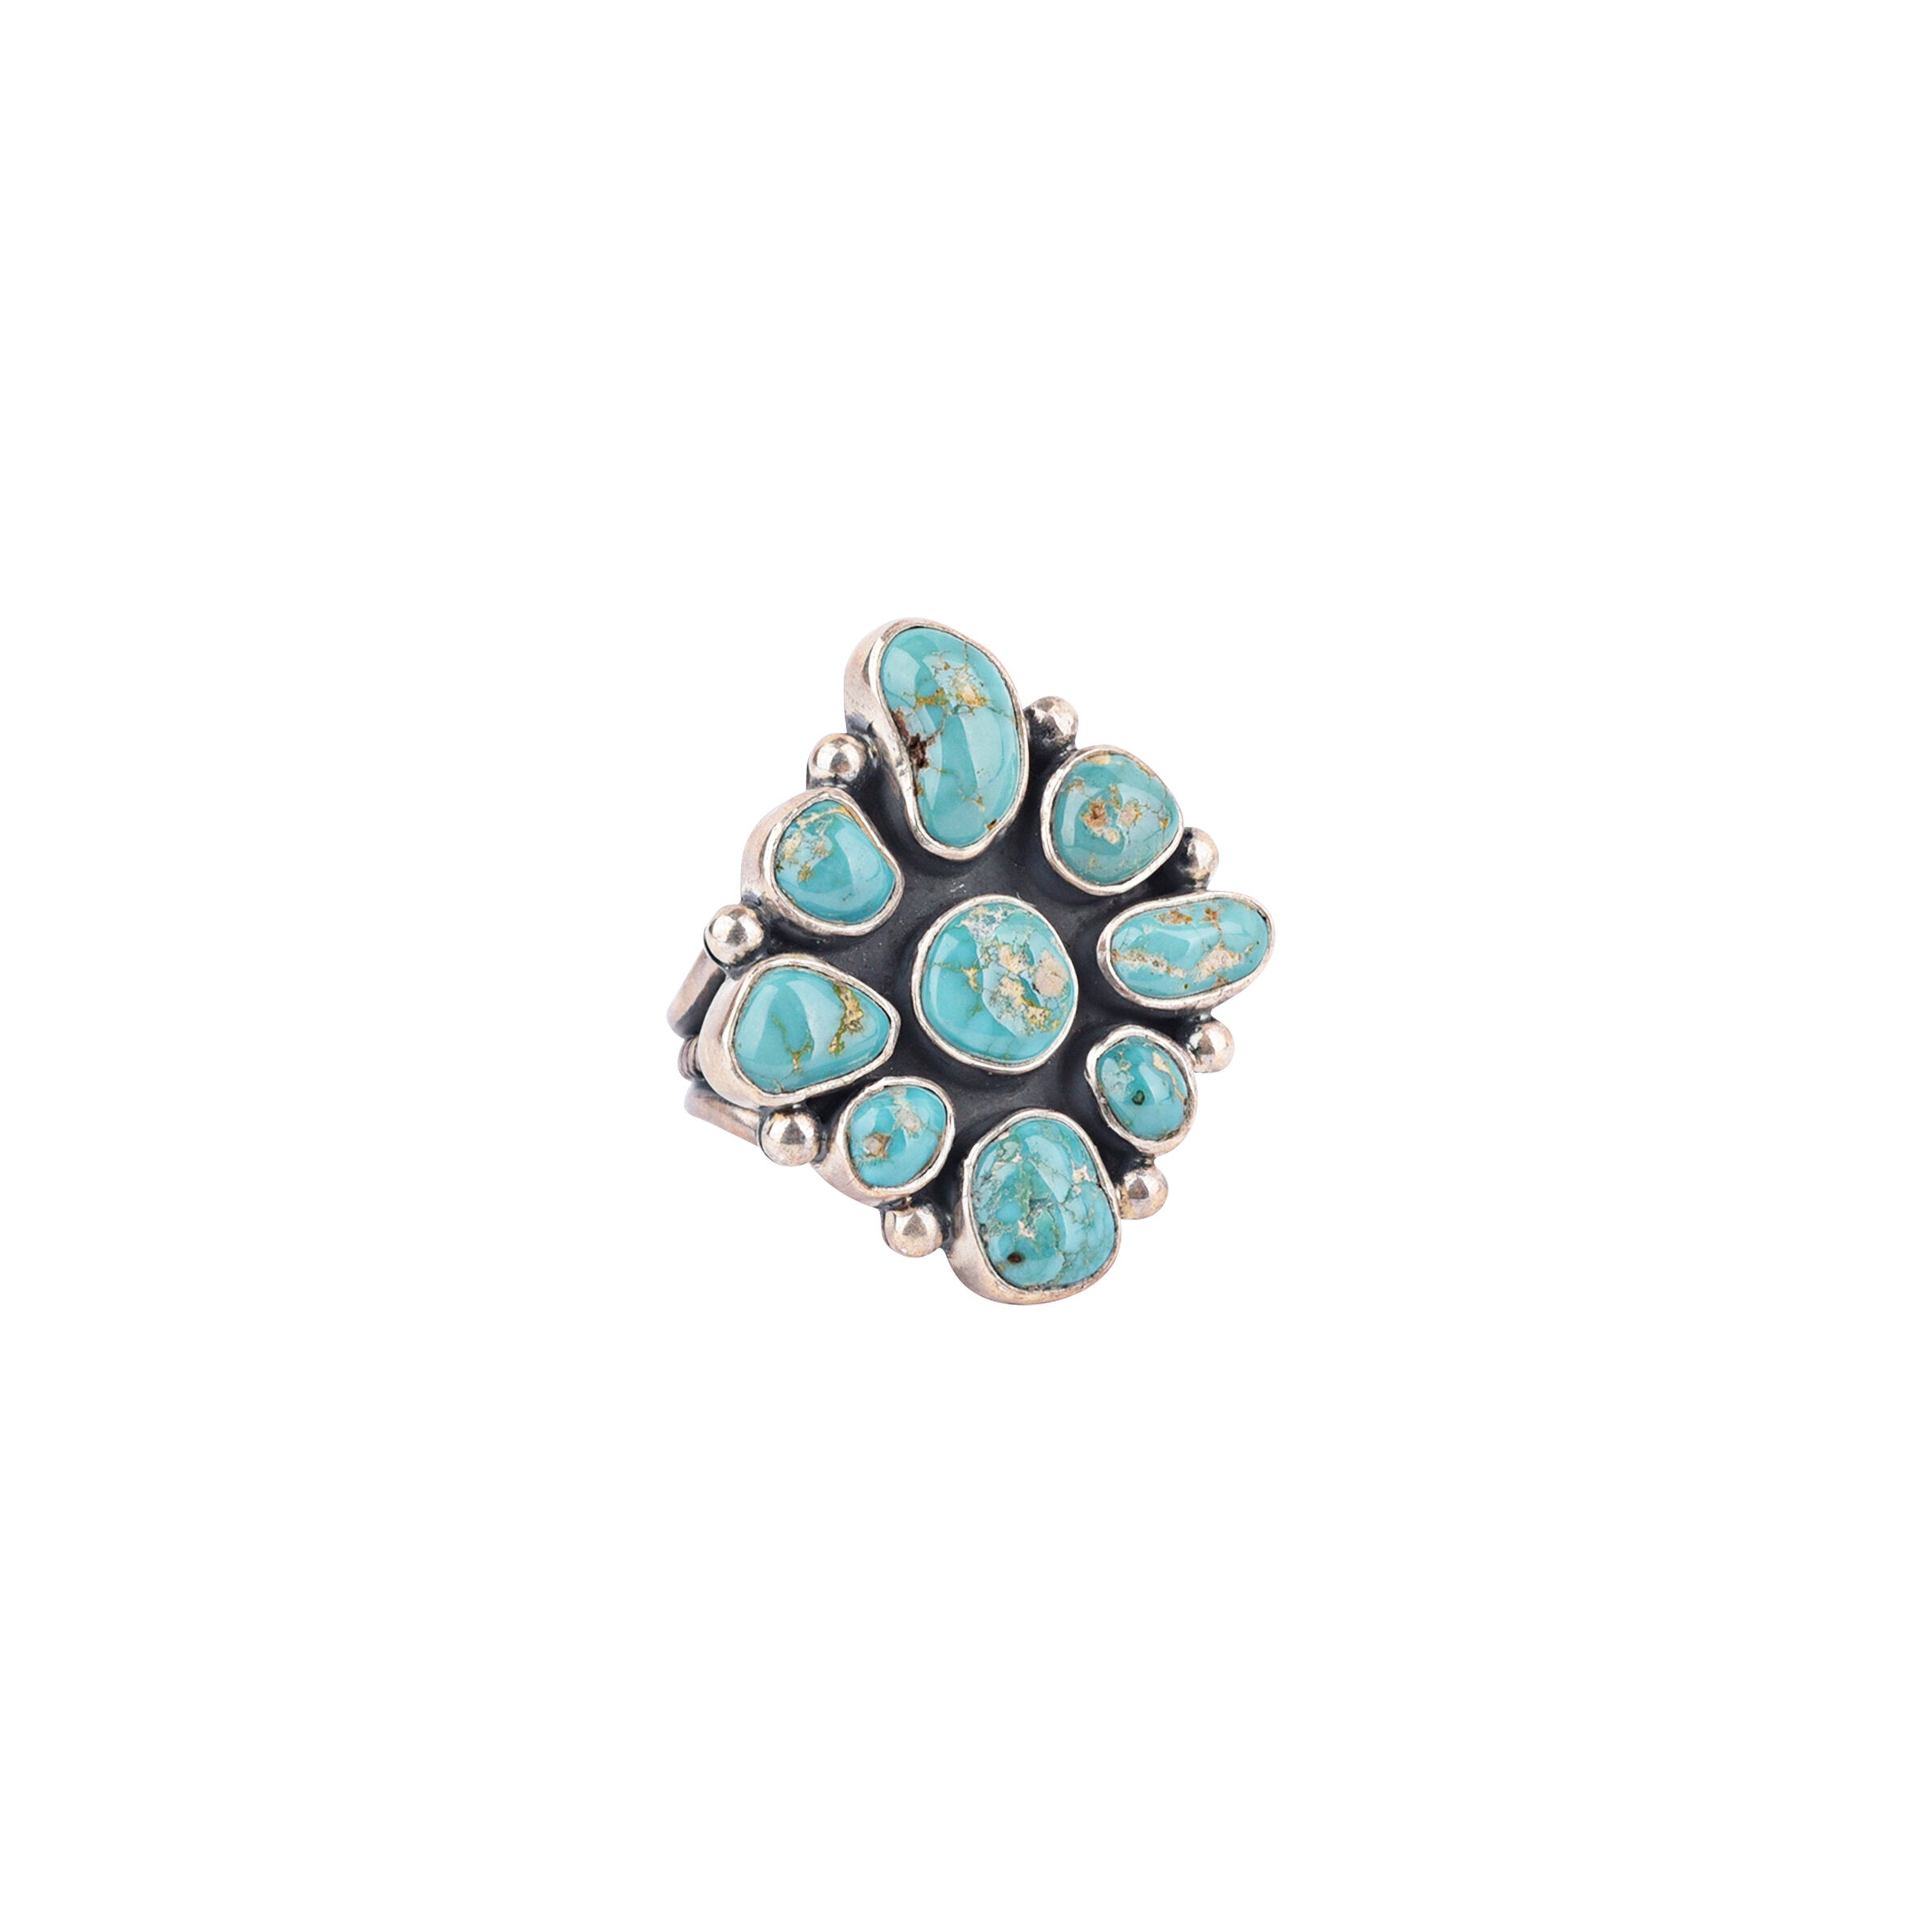 KRS Studios Blossom Ring - Size 7 1/2